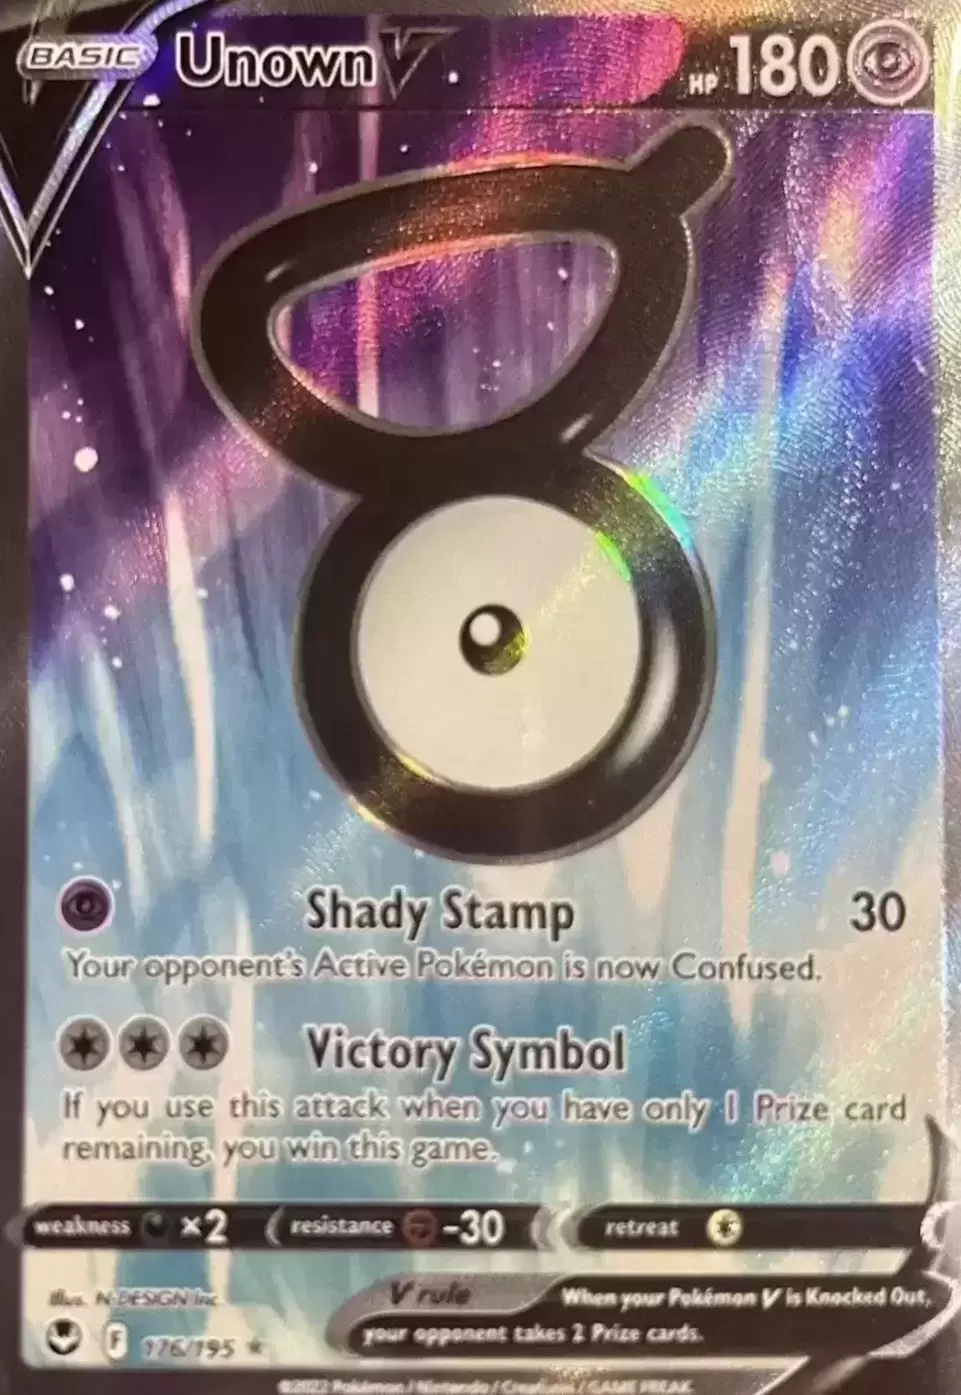 Unown V - 065/195 - Silver Tempest – Card Cavern Trading Cards, LLC